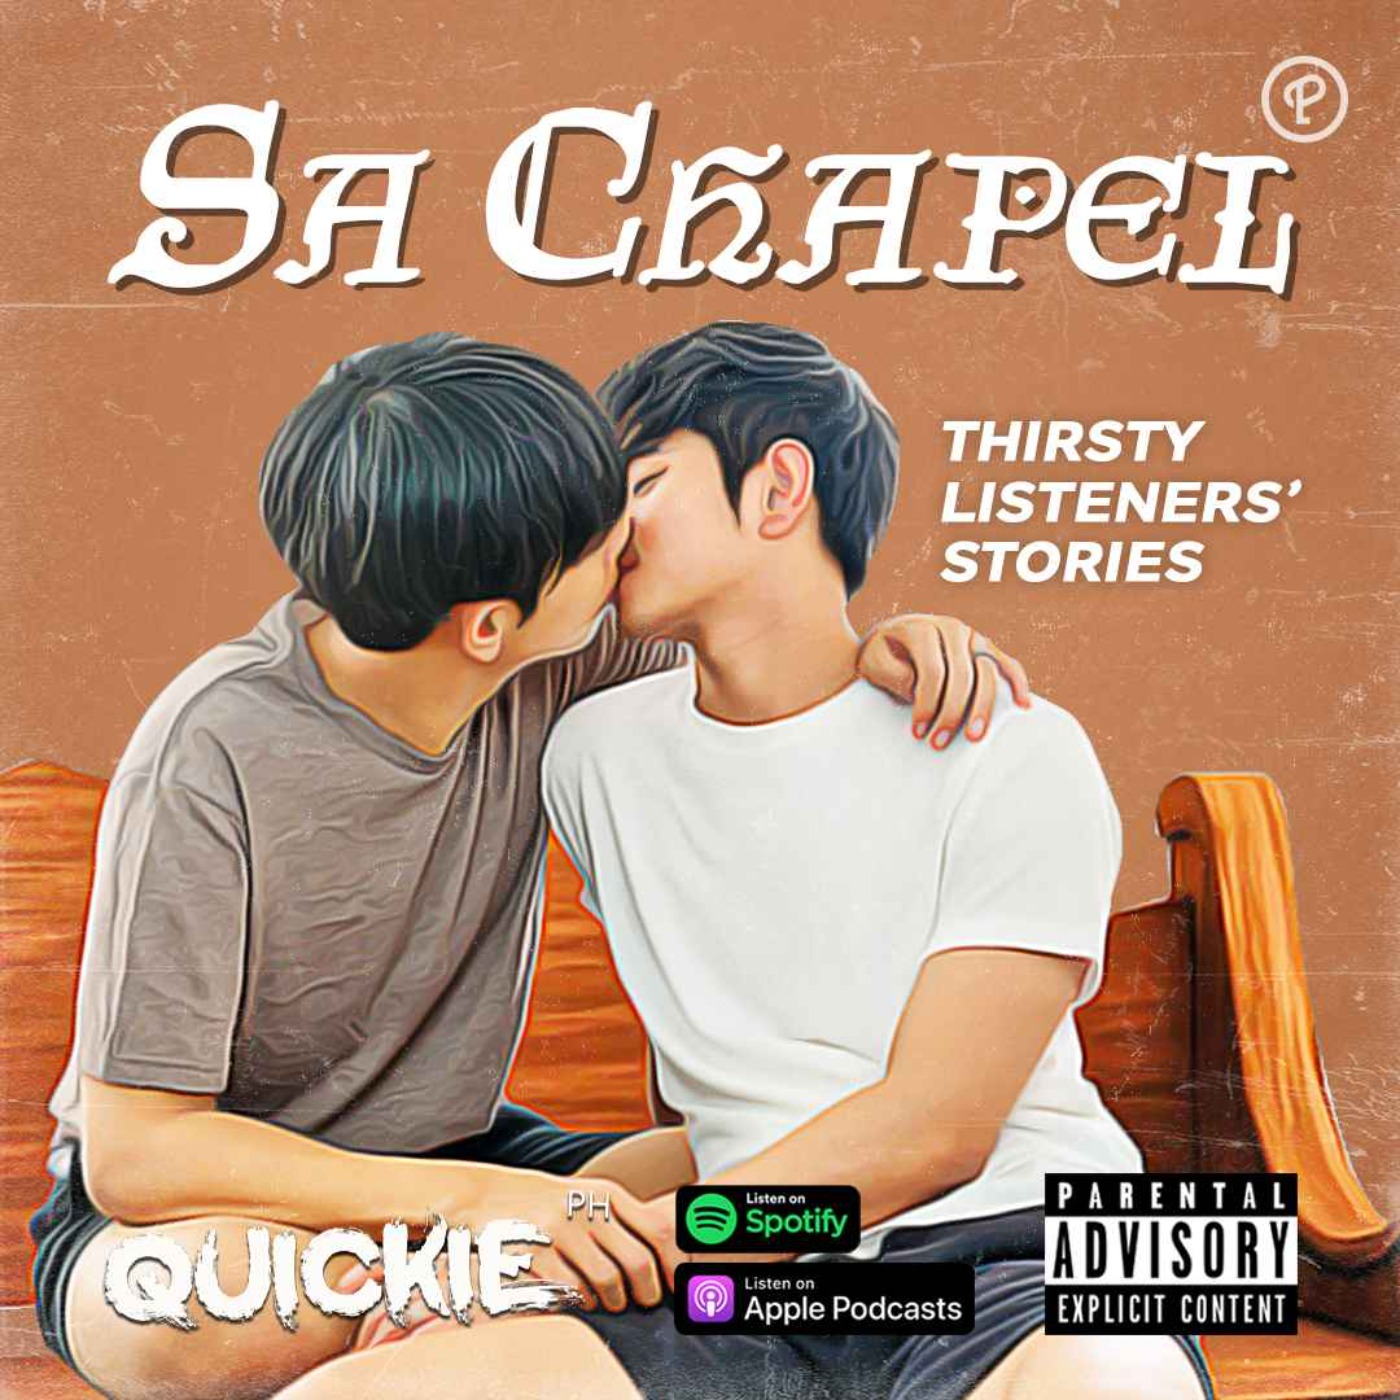 Thirsty Listeners’ Stories #48 Sa Chapel